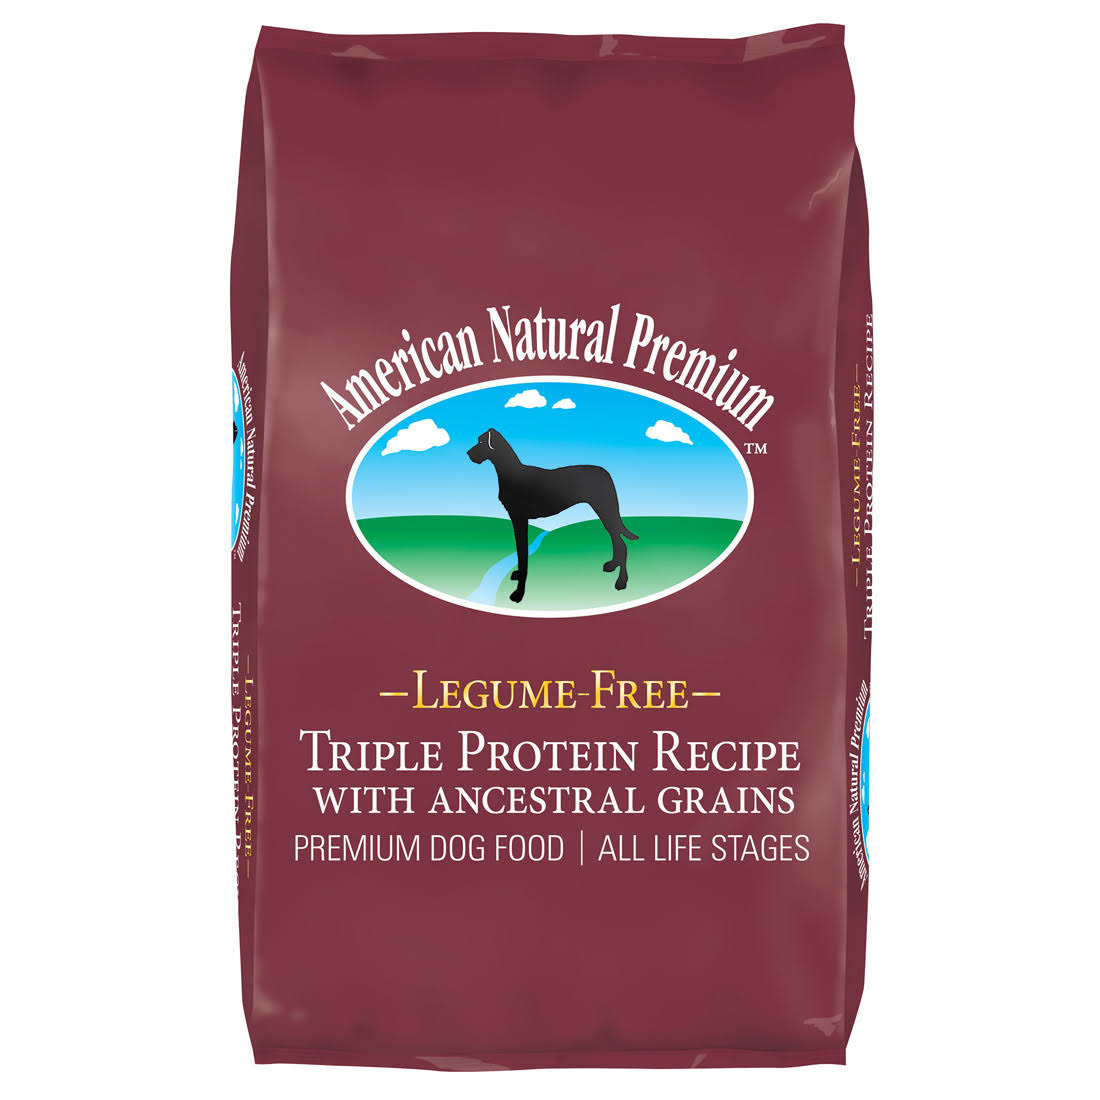 American Natural Premium Legume Free Triple Protein Recipe with Ancestral Grains Dog Food - 4lb